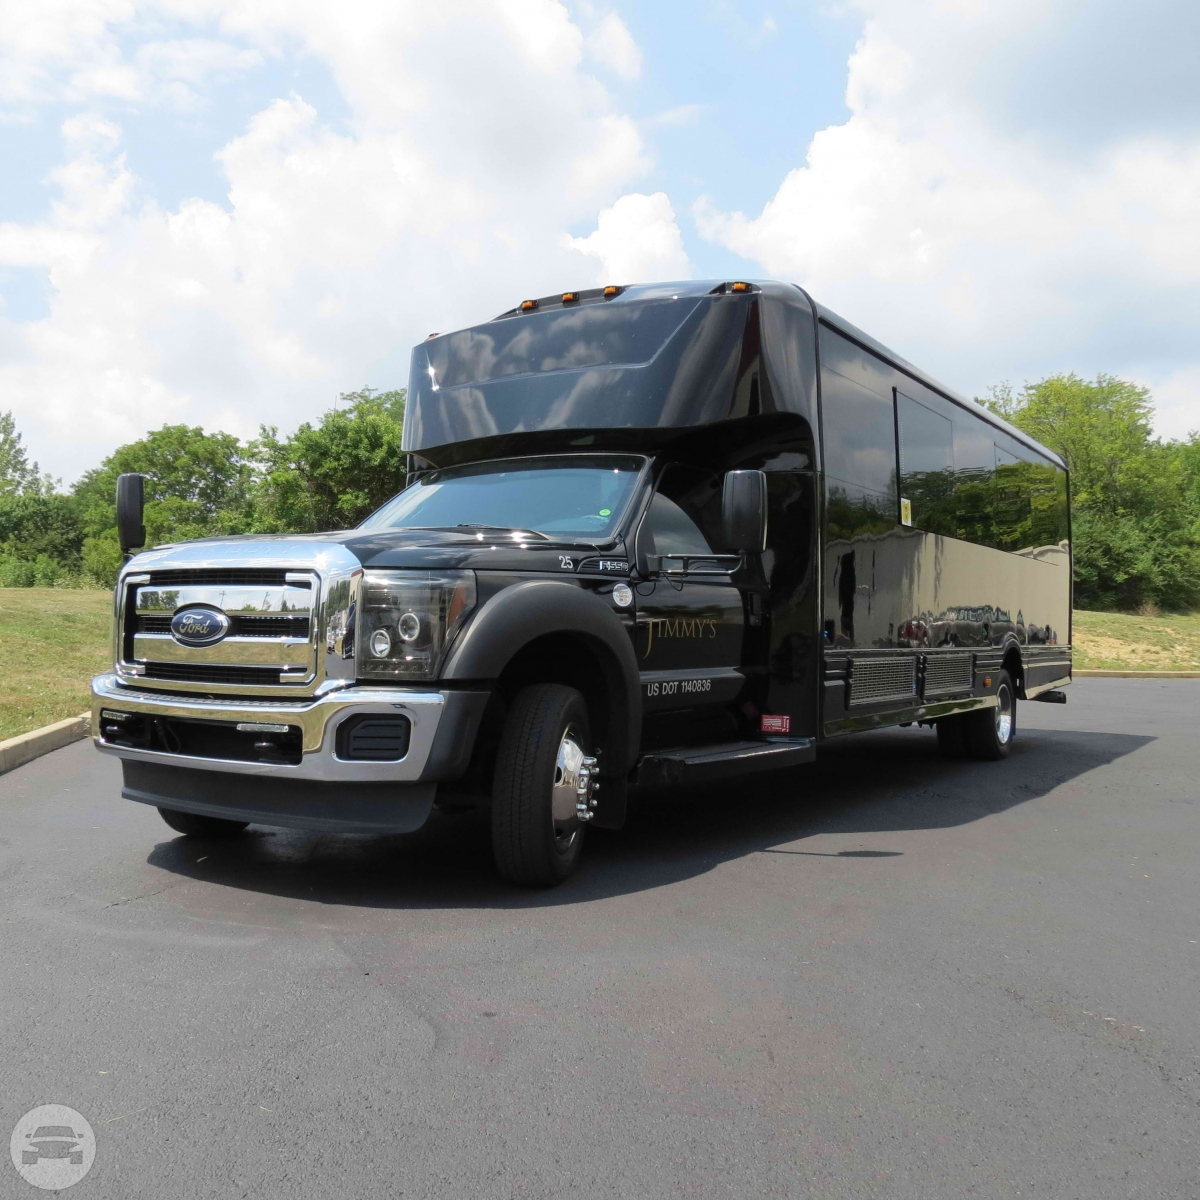 Black Ford 550 Party Bus
Party Limo Bus /
Cincinnati, OH

 / Hourly $0.00
